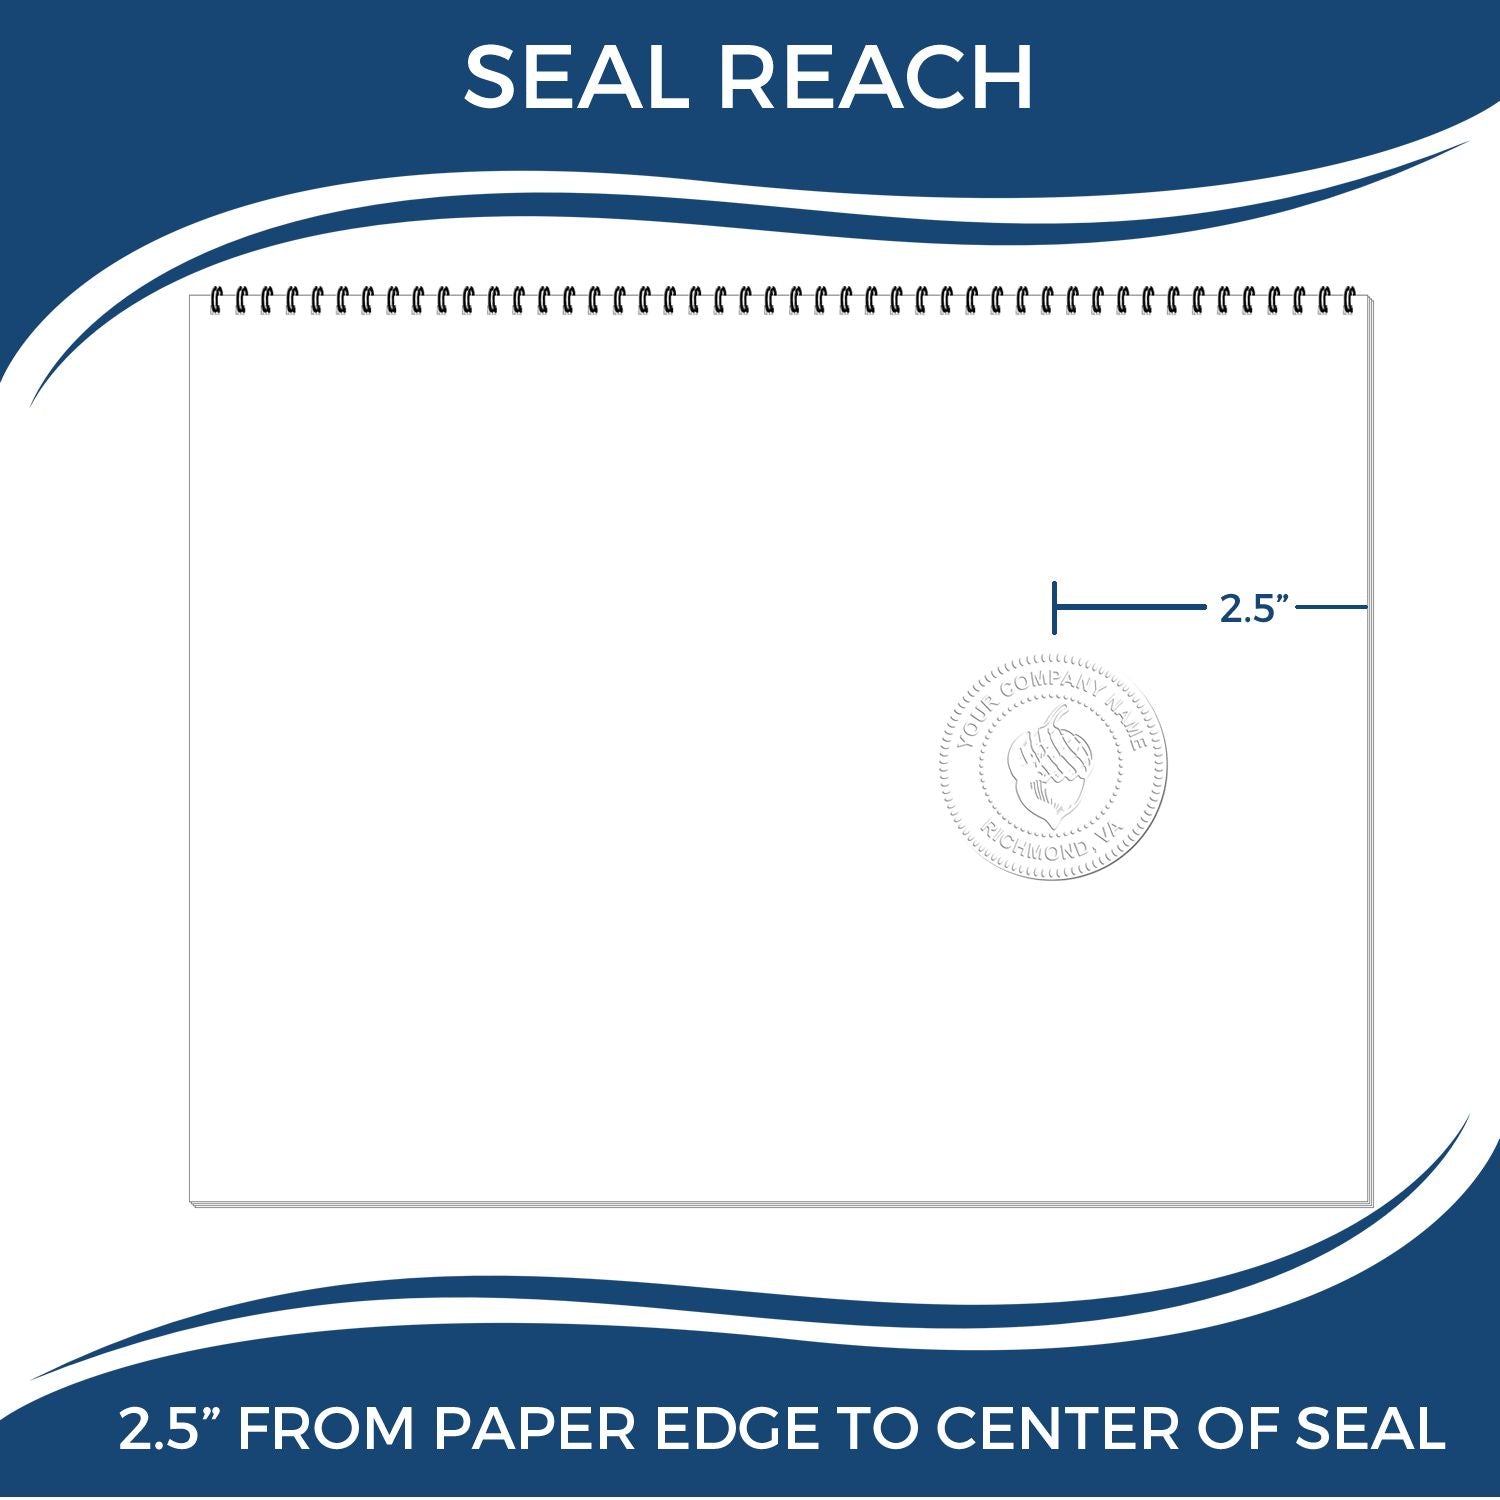 An infographic showing the seal reach which is represented by a ruler and a miniature seal image of the Heavy Duty Cast Iron Colorado Architect Embosser